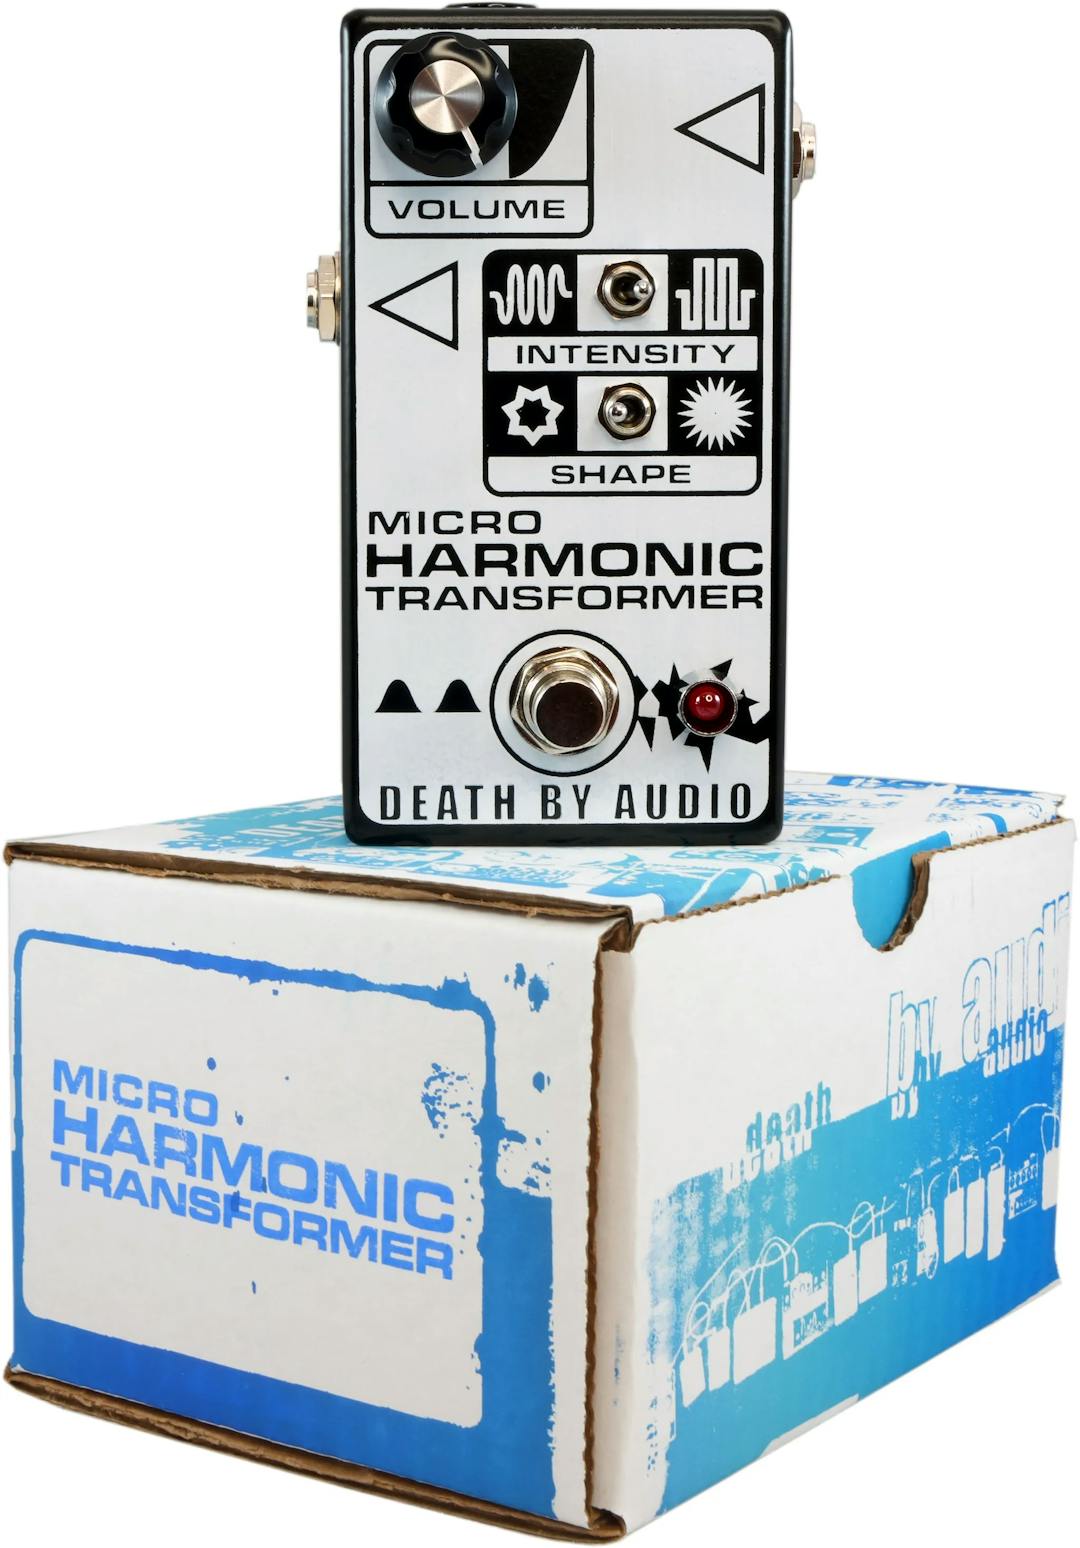 Micro Harmonic Transformer Guitar Pedal By Death By Audio